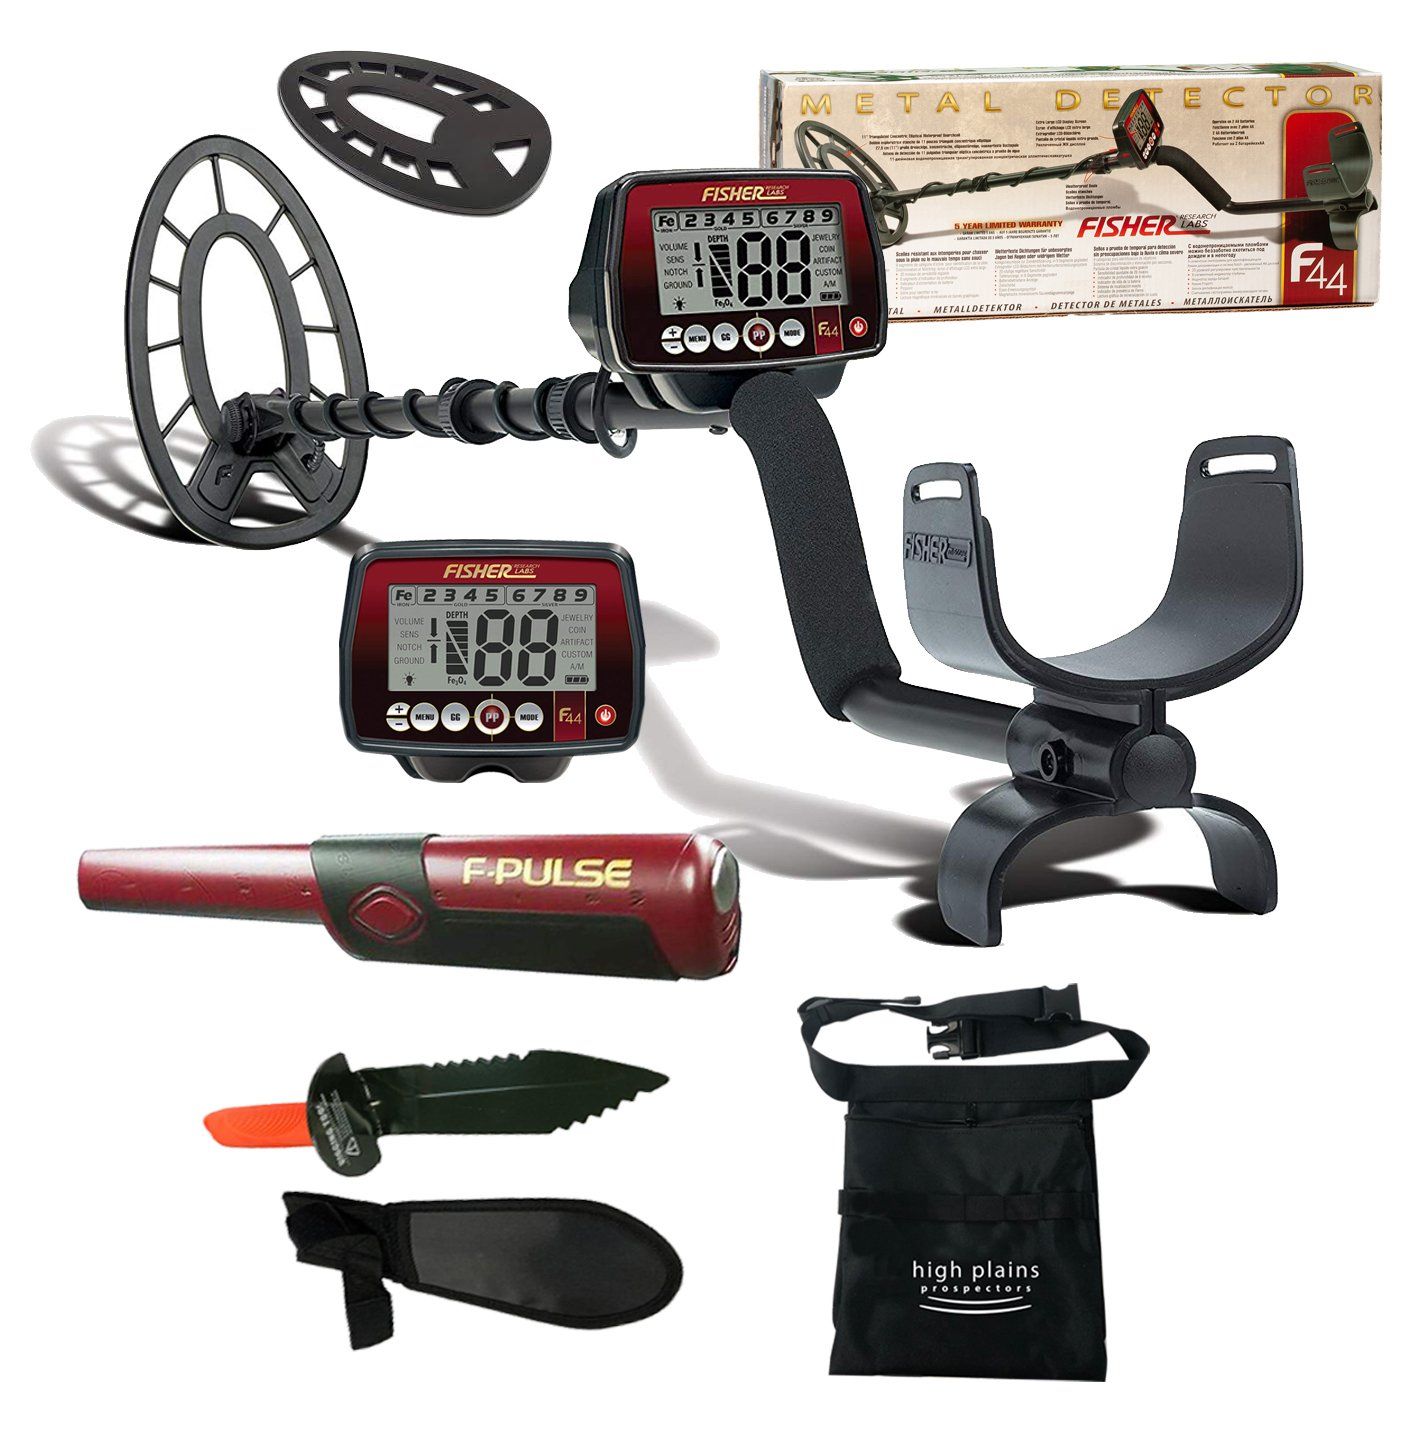 Fisher F44 Metal Detector Discovery Bundle